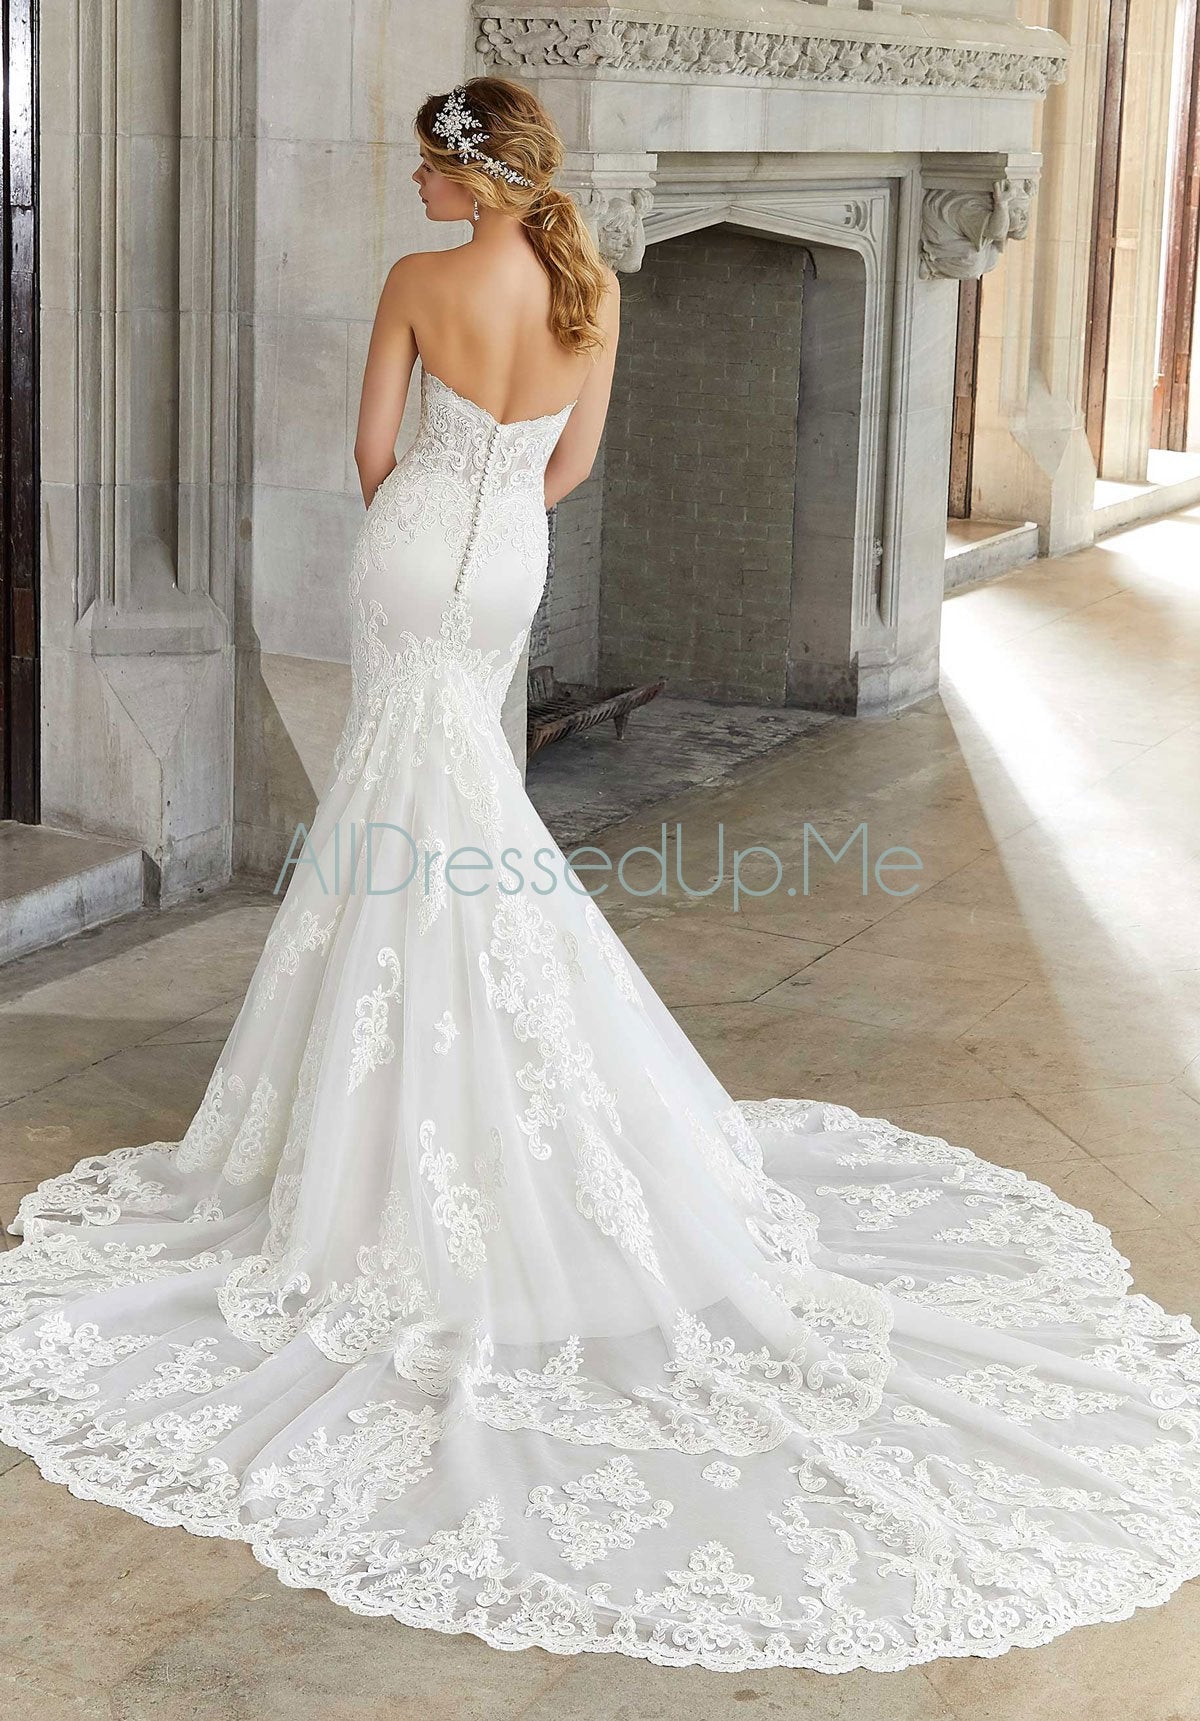 Morilee - Sonia - 2144 - Cheron's Bridal, Wedding Gown - Morilee Line - - Wedding Gowns Dresses Chattanooga Hixson Shops Boutiques Tennessee TN Georgia GA MSRP Lowest Prices Sale Discount